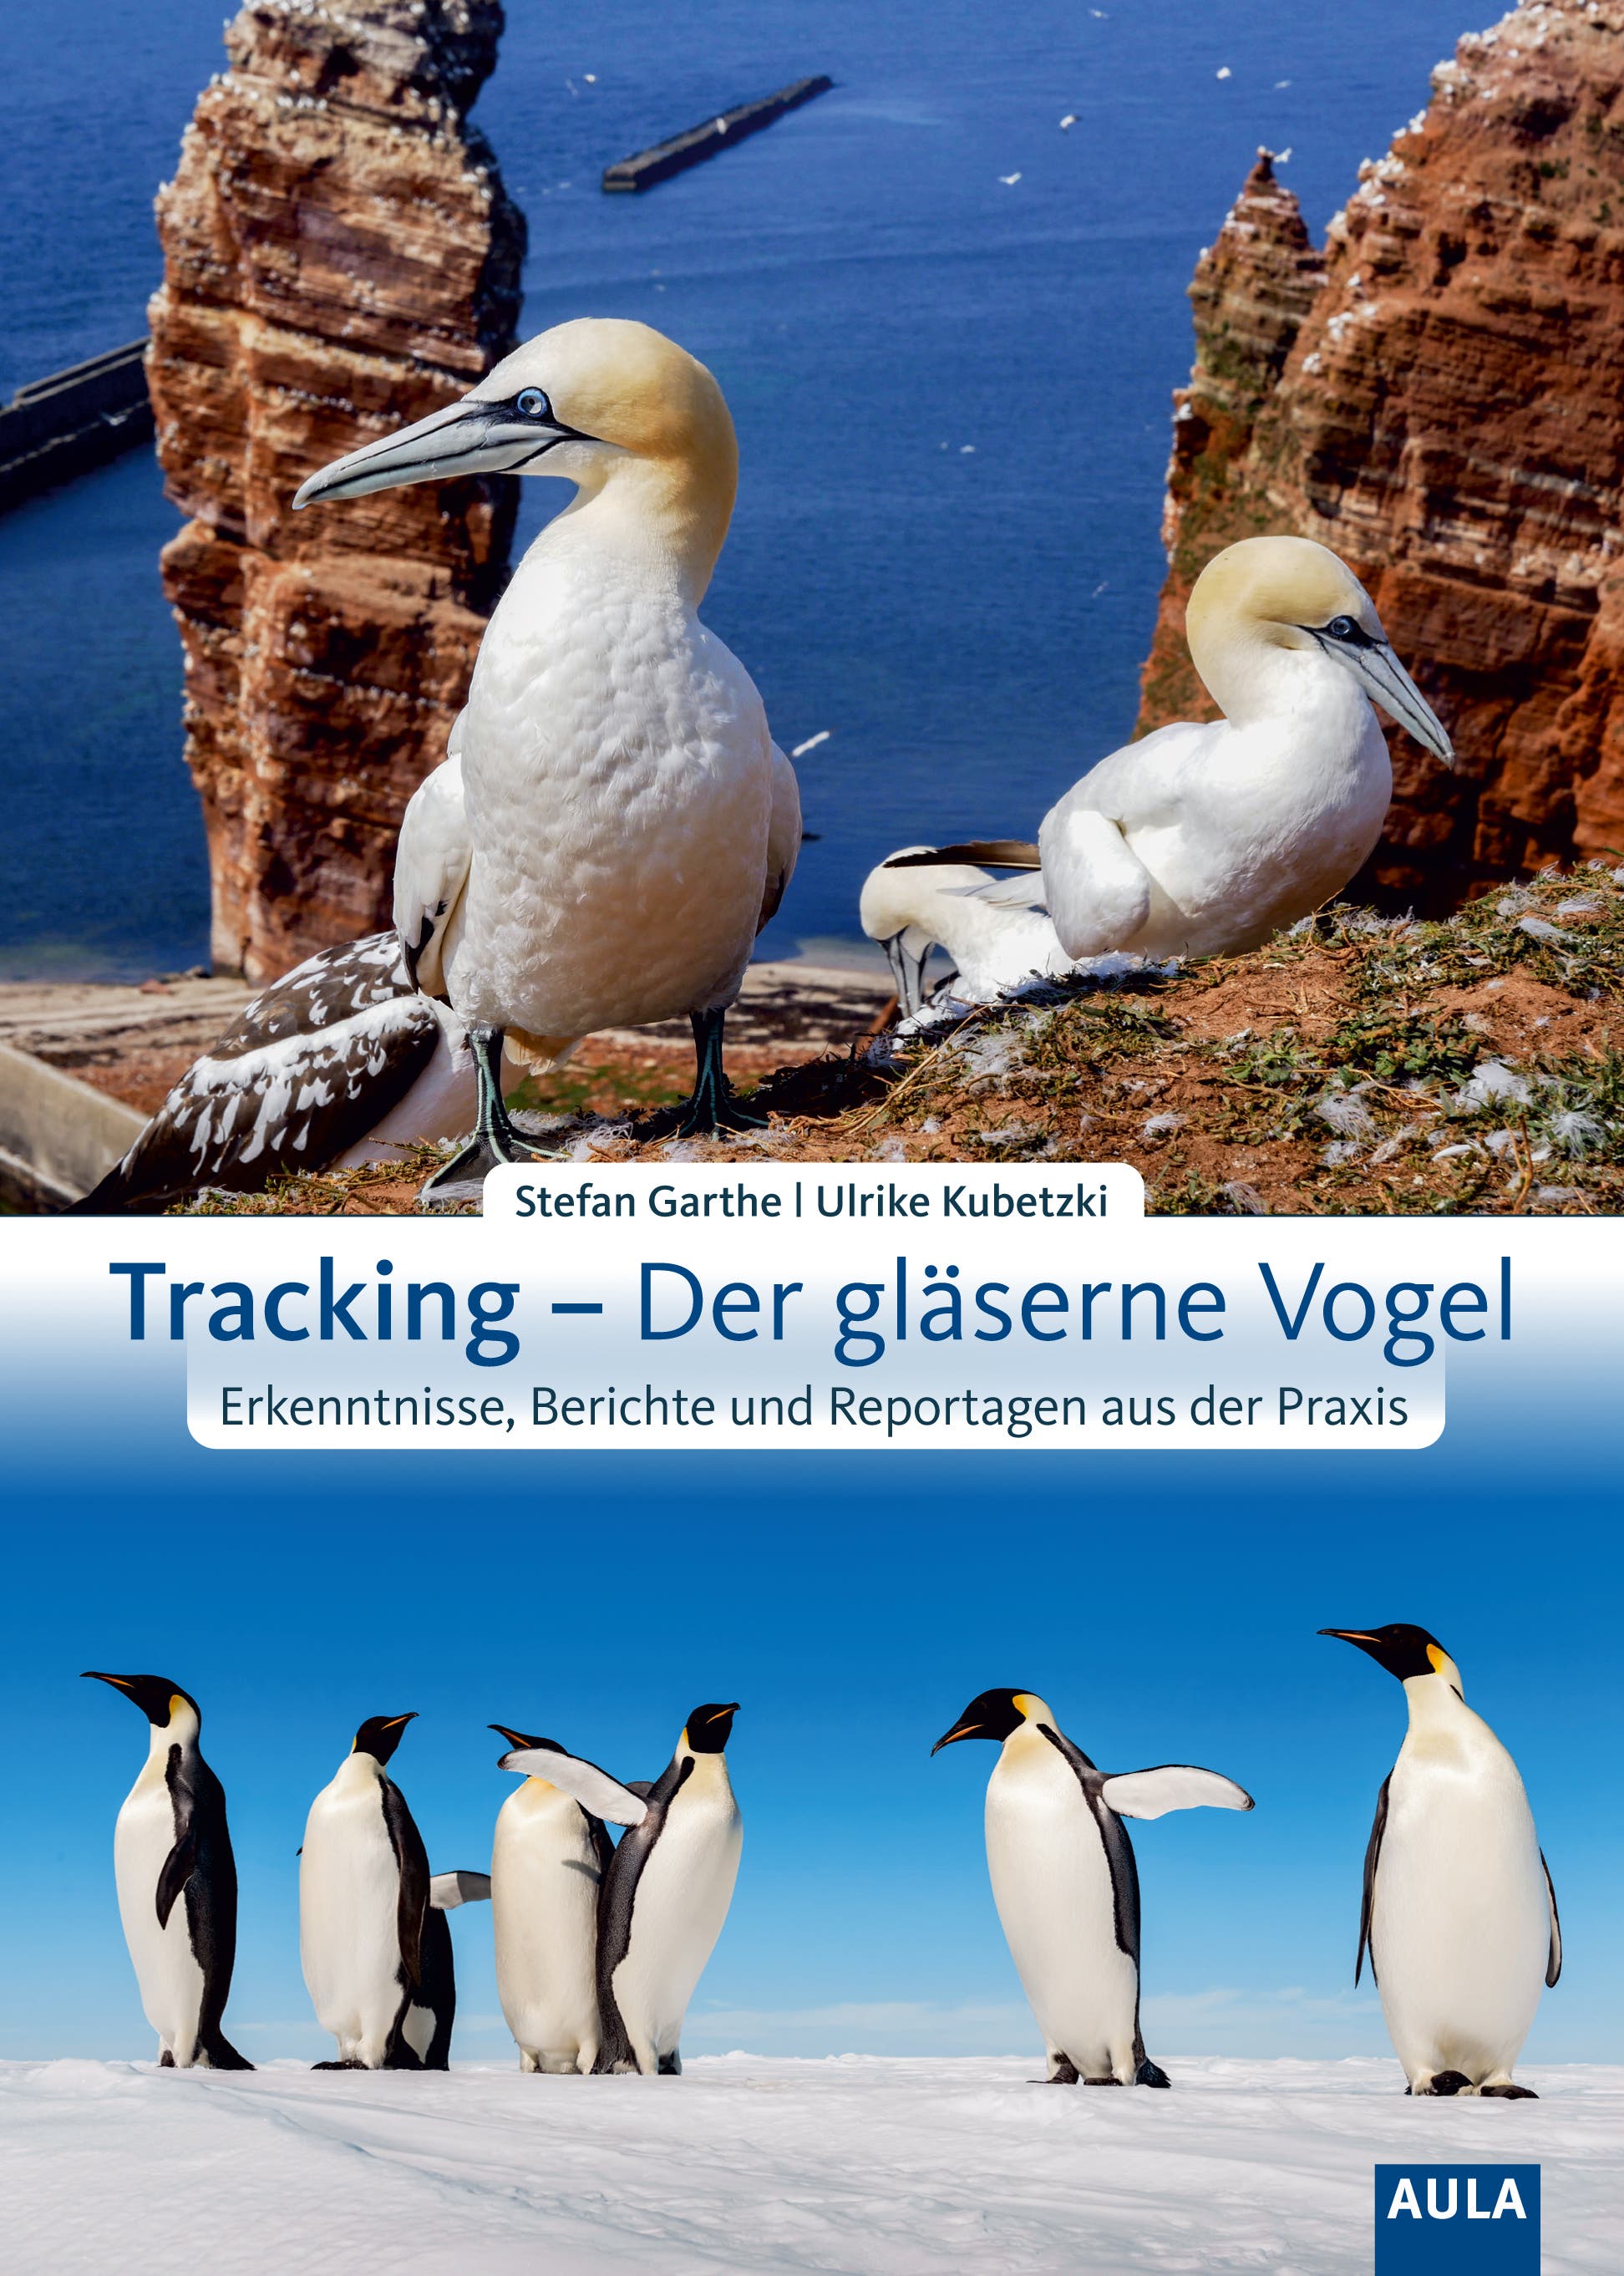 Review of the book “Tracking – The Glass Bird”